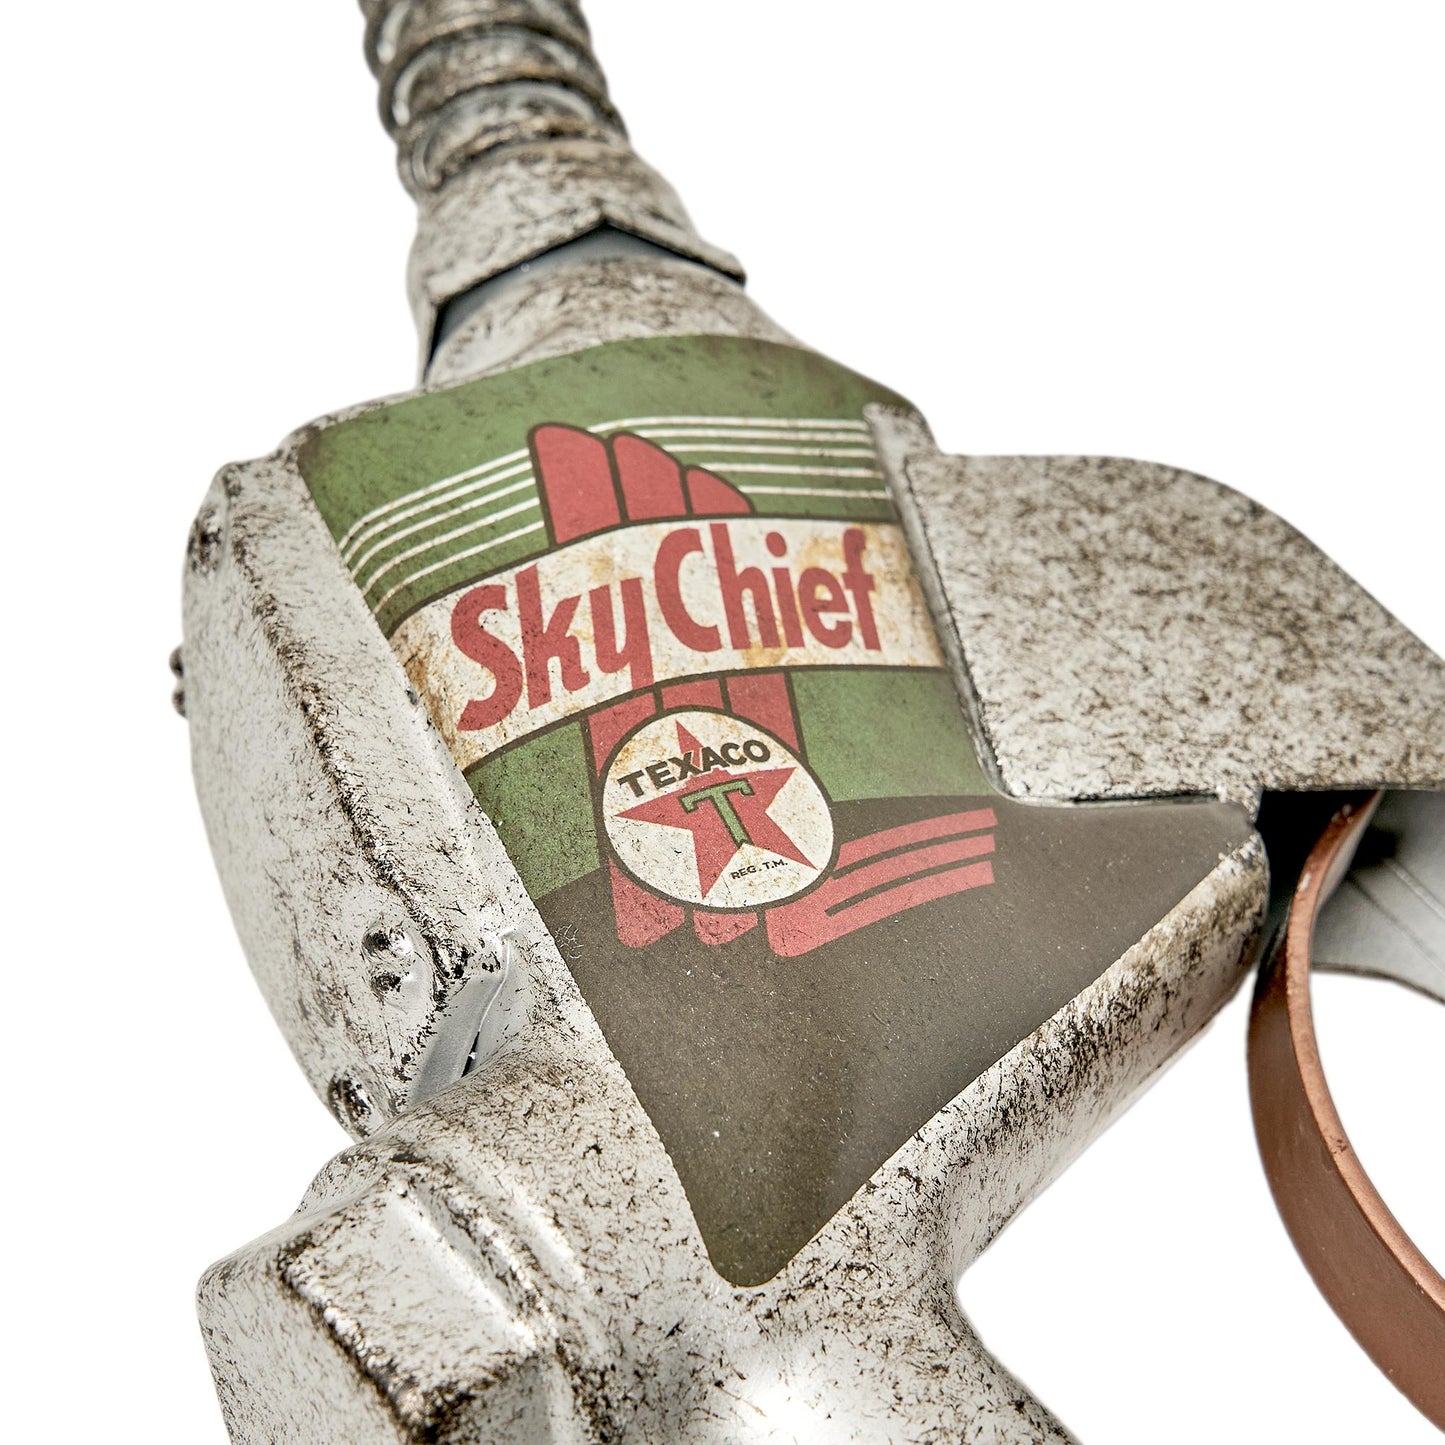 Sky Chief Metal Gas Nozzle Wall Decor Sign 5.75" x 14.5"